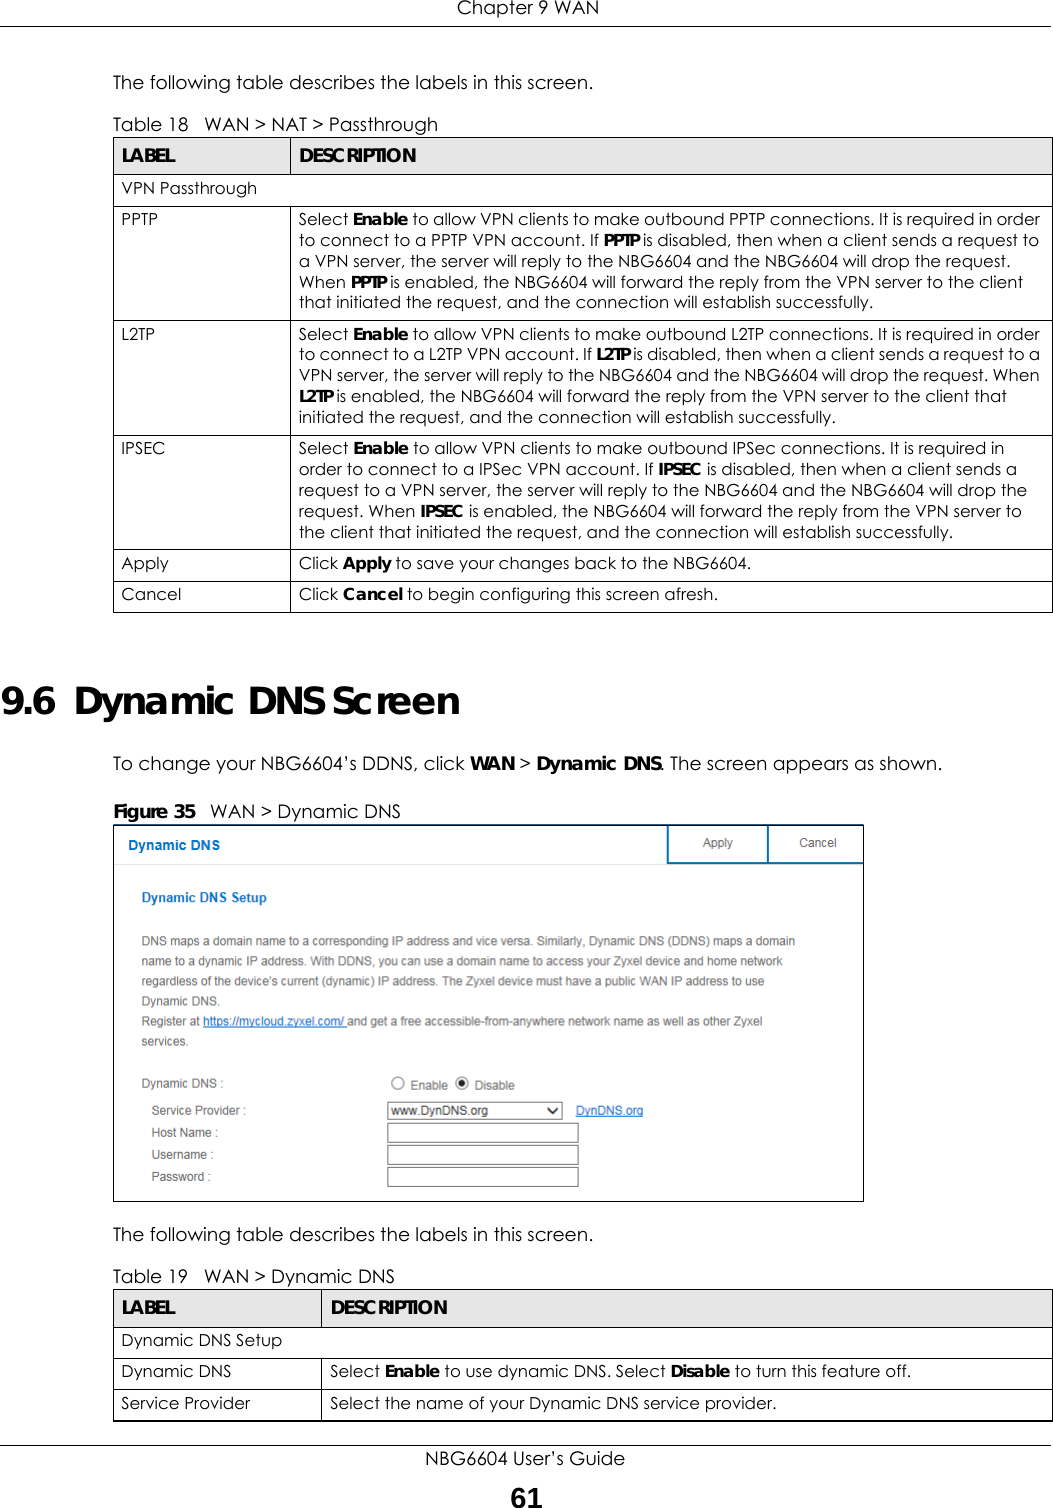  Chapter 9 WANNBG6604 User’s Guide61The following table describes the labels in this screen.9.6  Dynamic DNS ScreenTo change your NBG6604’s DDNS, click WAN &gt; Dynamic DNS. The screen appears as shown.Figure 35   WAN &gt; Dynamic DNS The following table describes the labels in this screen.Table 18   WAN &gt; NAT &gt; Passthrough LABEL DESCRIPTIONVPN Passthrough PPTP Select Enable to allow VPN clients to make outbound PPTP connections. It is required in order to connect to a PPTP VPN account. If PPTP is disabled, then when a client sends a request to a VPN server, the server will reply to the NBG6604 and the NBG6604 will drop the request. When PPTP is enabled, the NBG6604 will forward the reply from the VPN server to the client that initiated the request, and the connection will establish successfully.L2TP Select Enable to allow VPN clients to make outbound L2TP connections. It is required in order to connect to a L2TP VPN account. If L2TP is disabled, then when a client sends a request to a VPN server, the server will reply to the NBG6604 and the NBG6604 will drop the request. When L2TP is enabled, the NBG6604 will forward the reply from the VPN server to the client that initiated the request, and the connection will establish successfully.IPSEC Select Enable to allow VPN clients to make outbound IPSec connections. It is required in order to connect to a IPSec VPN account. If IPSEC is disabled, then when a client sends a request to a VPN server, the server will reply to the NBG6604 and the NBG6604 will drop the request. When IPSEC is enabled, the NBG6604 will forward the reply from the VPN server to the client that initiated the request, and the connection will establish successfully.Apply Click Apply to save your changes back to the NBG6604.Cancel Click Cancel to begin configuring this screen afresh.Table 19   WAN &gt; Dynamic DNS LABEL DESCRIPTIONDynamic DNS SetupDynamic DNS Select Enable to use dynamic DNS. Select Disable to turn this feature off.Service Provider Select the name of your Dynamic DNS service provider.